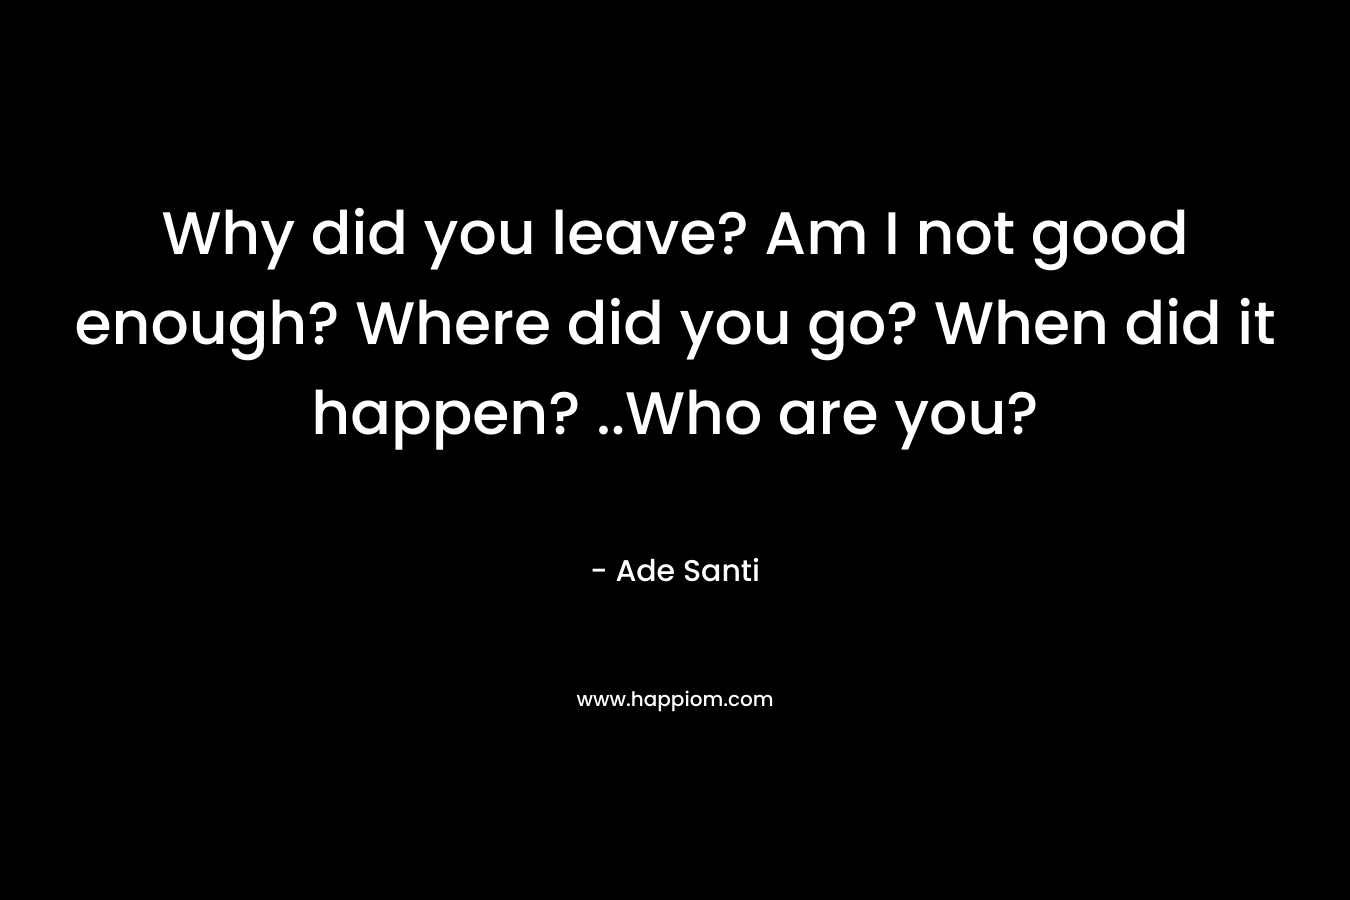 Why did you leave? Am I not good enough? Where did you go? When did it happen? ..Who are you?